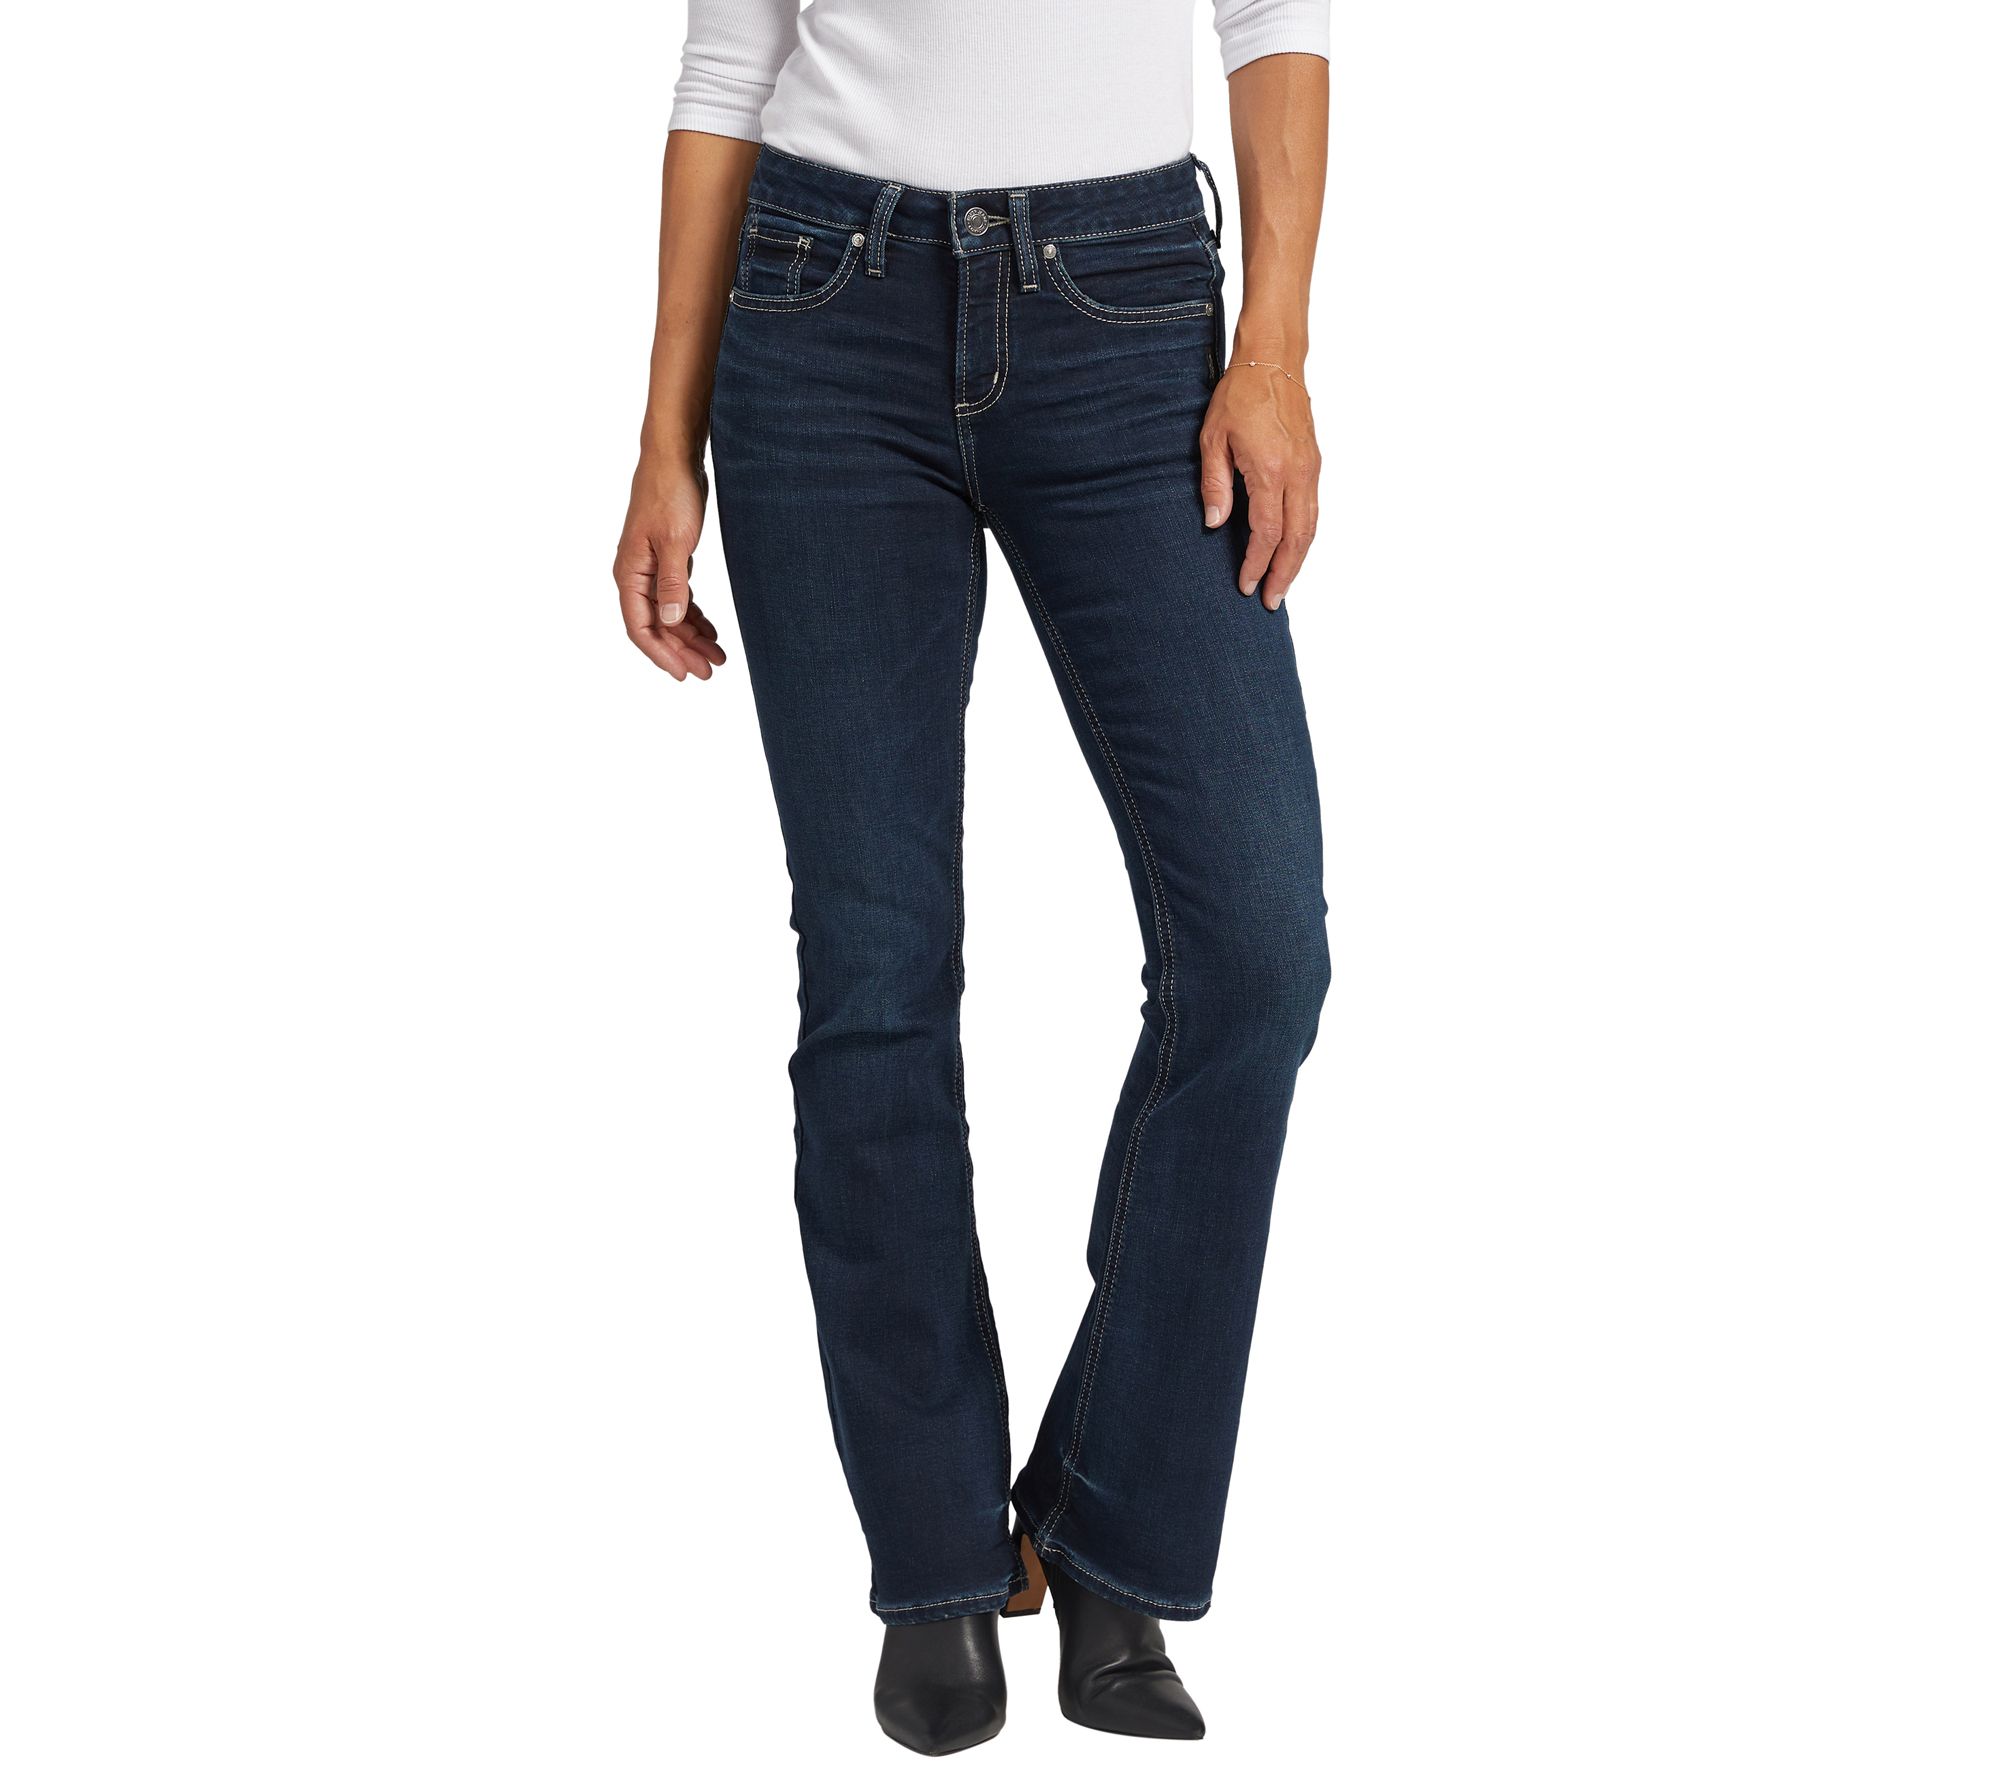 Silver Jeans Co. Suki Mid Rise Bootcut Jeans - COO408 - QVC.com